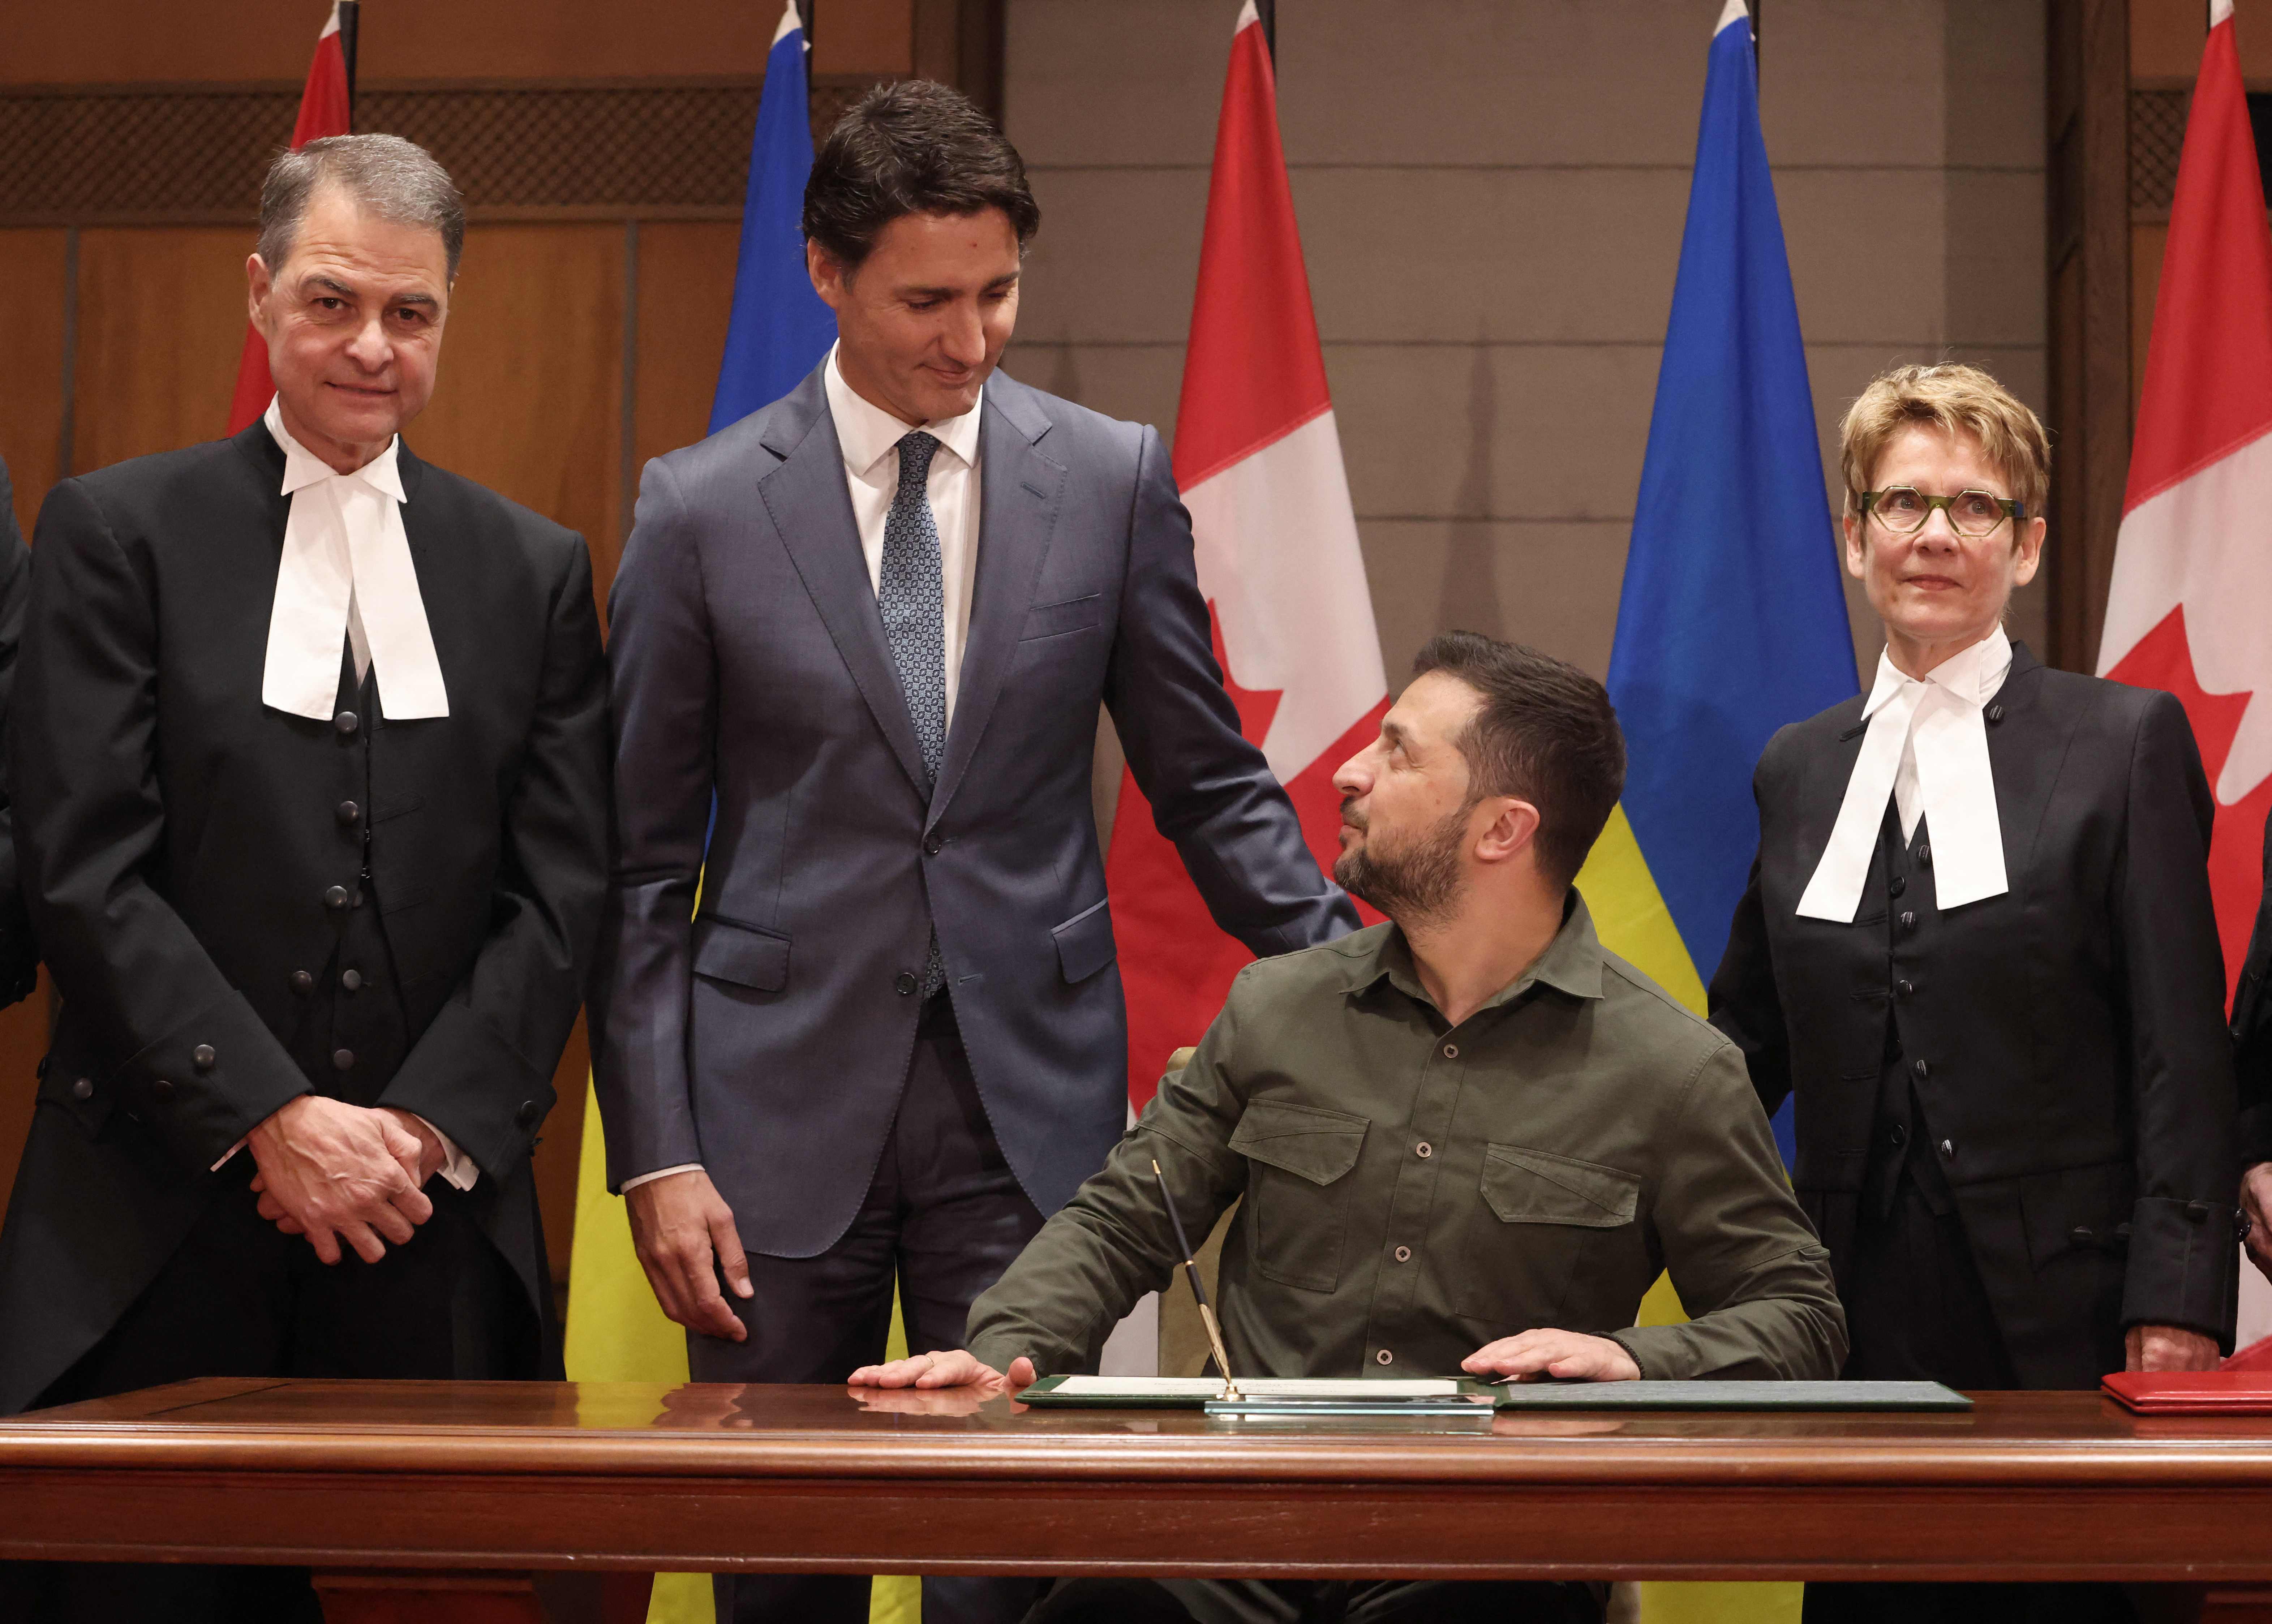 Canada extending $650-million in additional aid for Ukraine - The